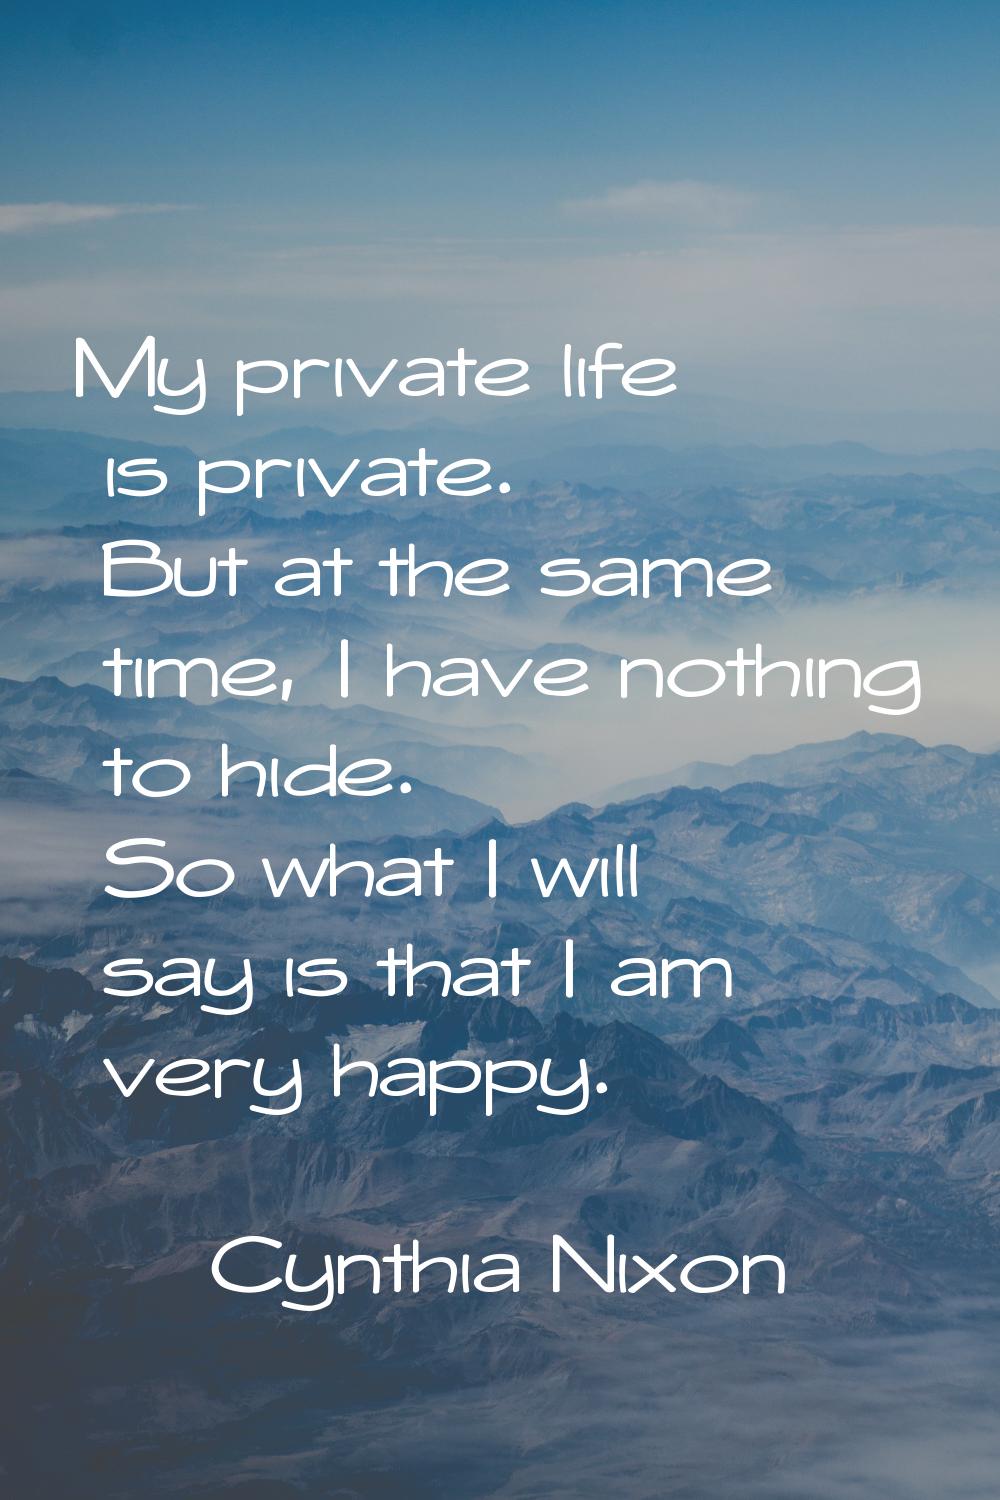 My private life is private. But at the same time, I have nothing to hide. So what I will say is tha